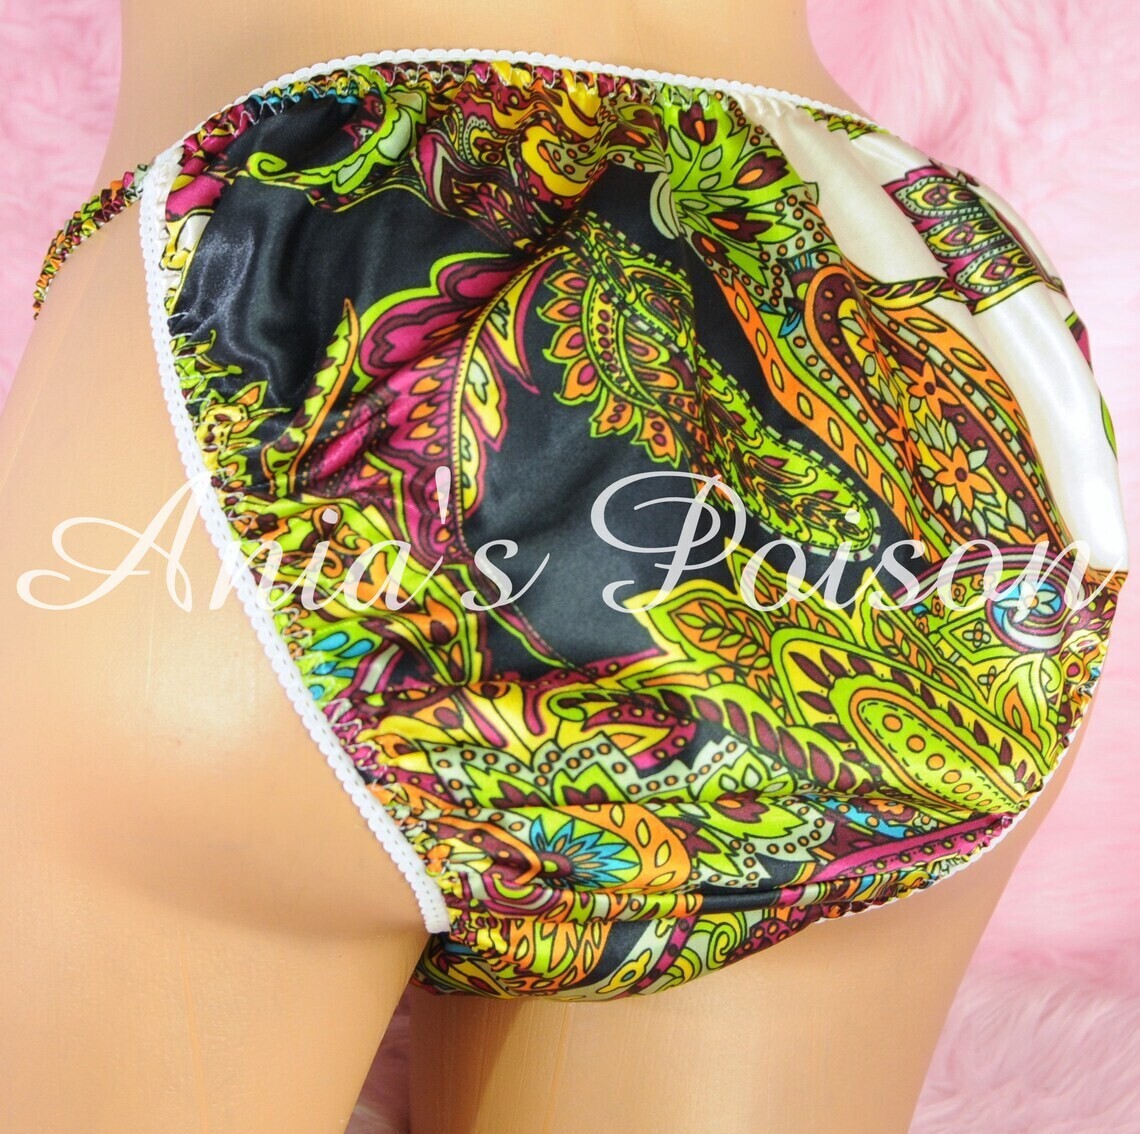 Floral Ethnic Tribal Paisley 100% polyester string bikini sissy men's underwear panties DEAD STOCK M and L, Size: M